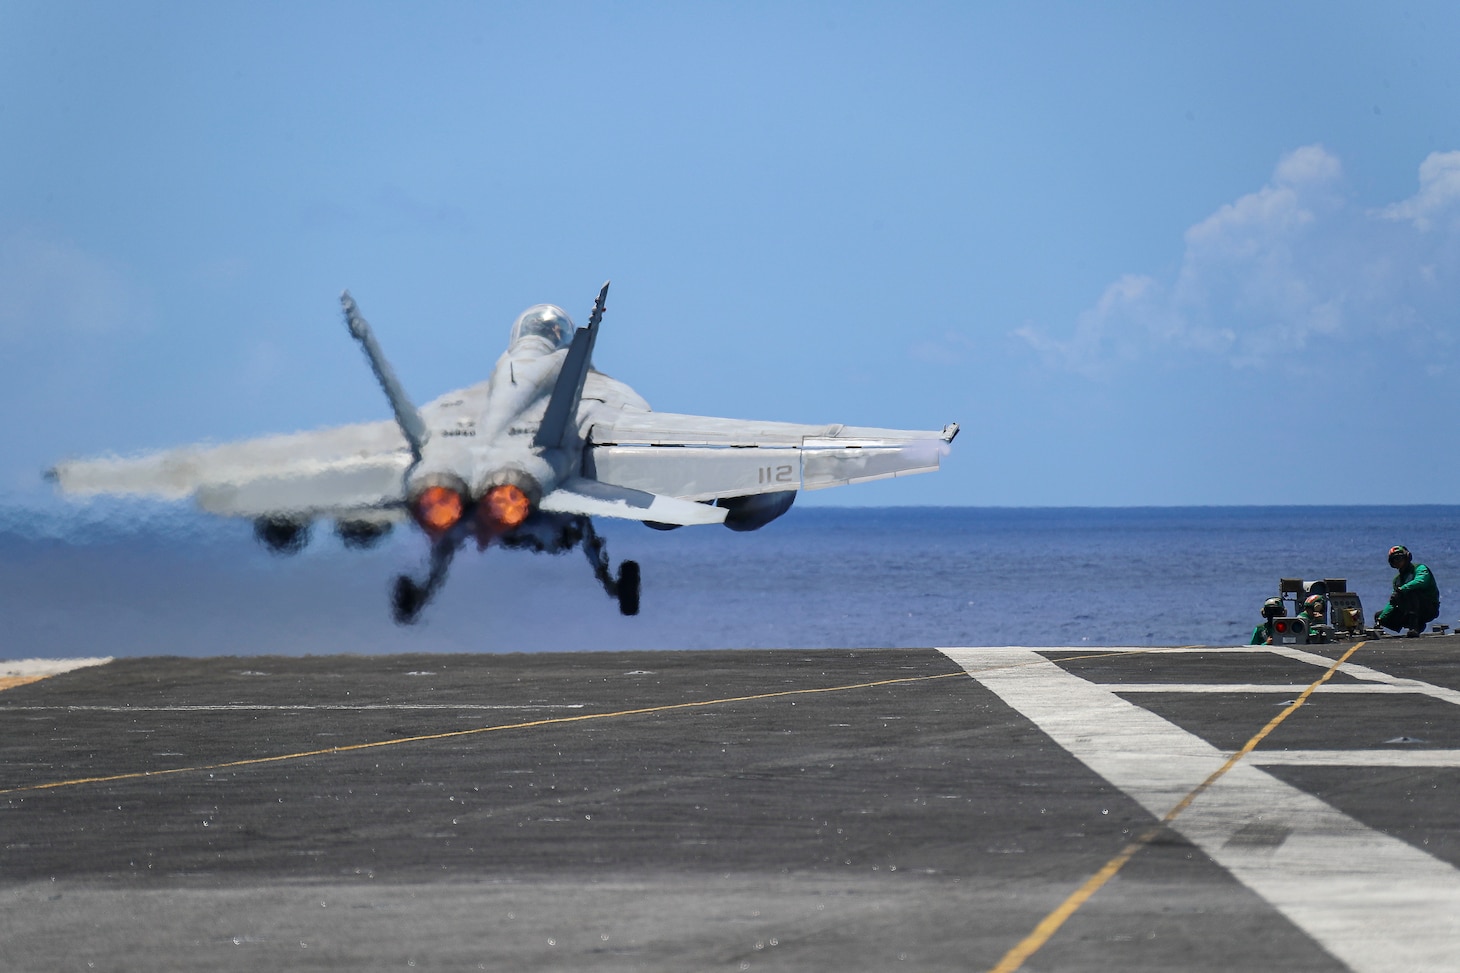 PHILIPPINE SEA (May 9, 2022) An F/A-18F Super Hornet, assigned to the "Black Aces" of Strike Fighter Squadron (VFA) 41, launches from the flight deck of the Nimitz-class aircraft carrier USS Abraham Lincoln (CVN 72). Long range maritime strikes capabilities such as these allow the U.S. Navy to find, fix, and target well beyond typical organic sensor capabilities across the Indo-Pacific. This capability, among others, serves as a deterrent to aggressive or malign actors and supports a free and open Indo-Pacific. (U.S. Navy photo by Mass Communication Specialist 3rd Class Javier Reyes)